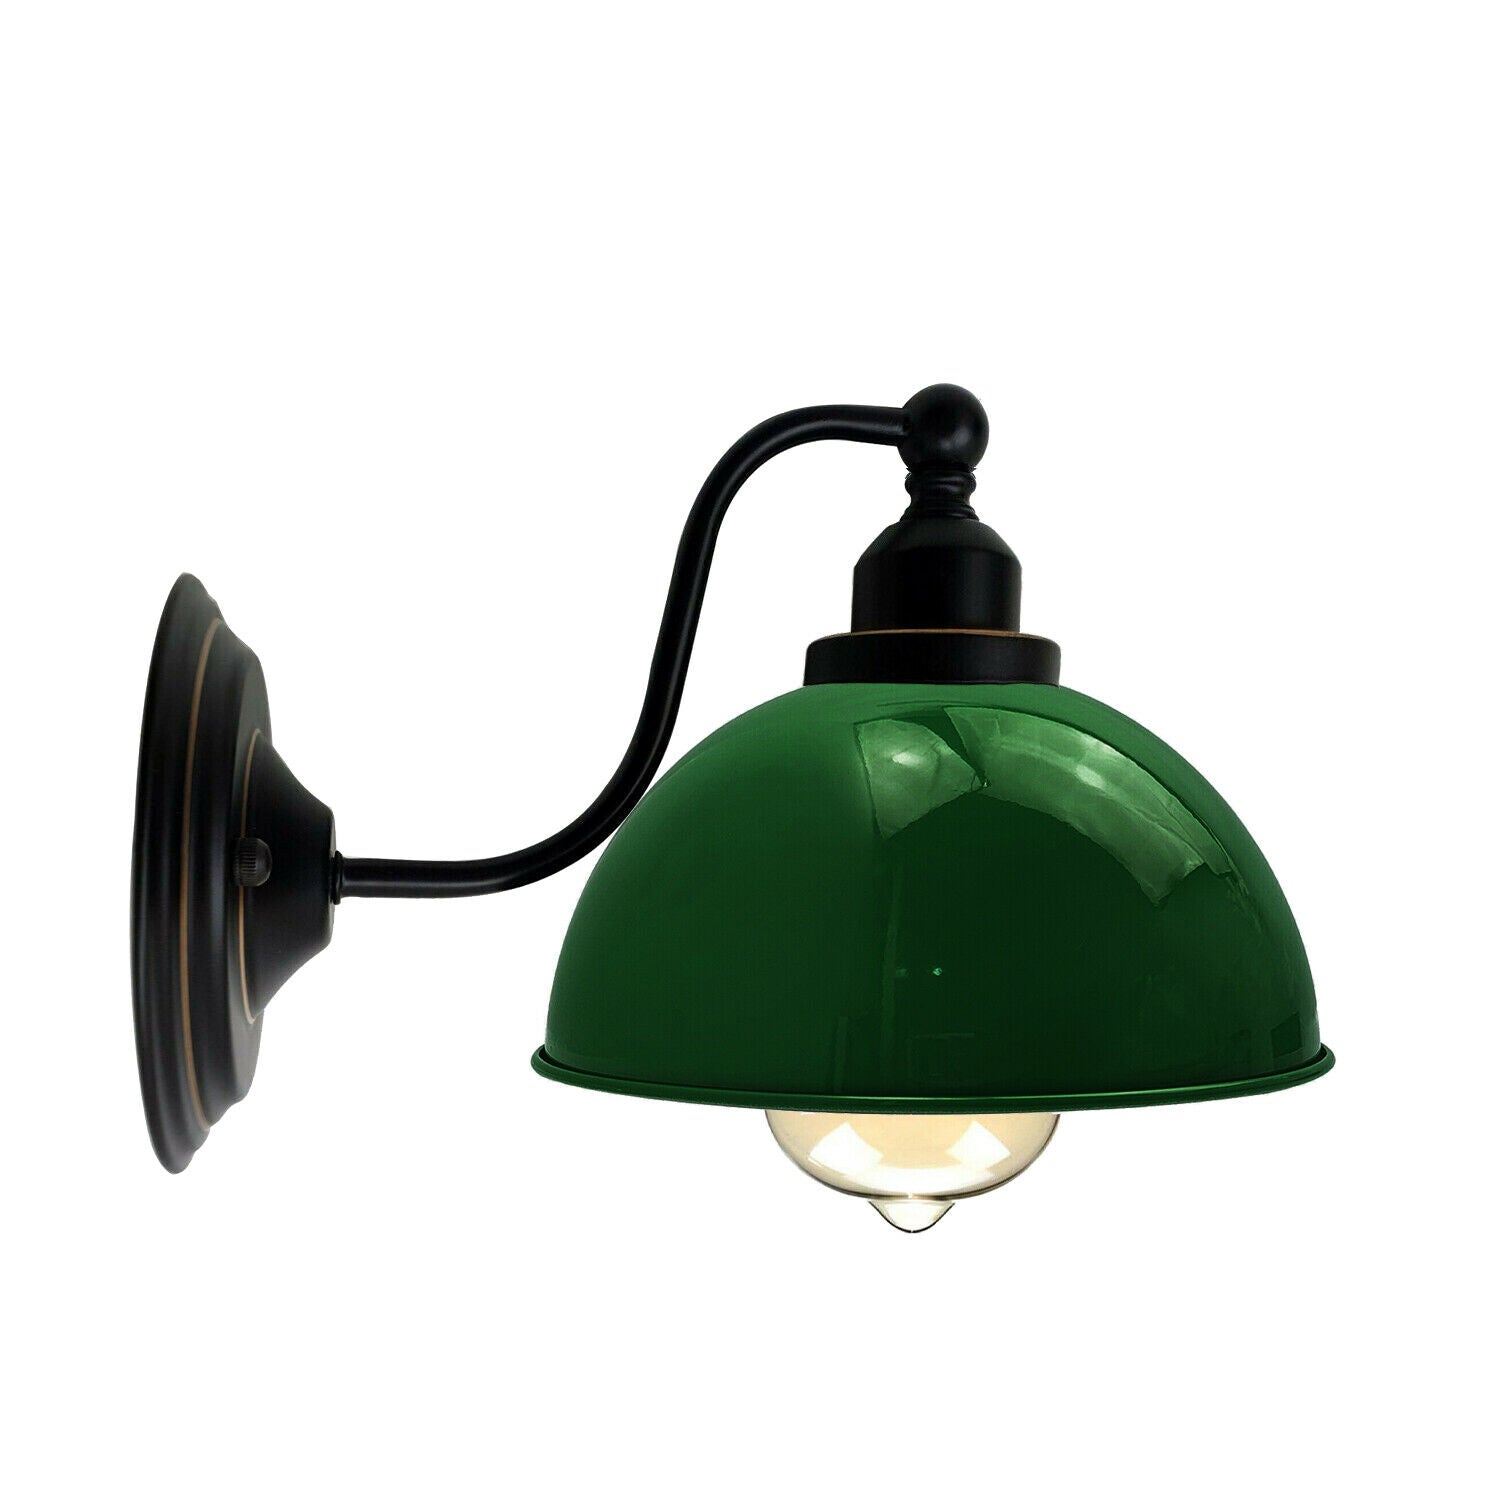 industrial vintage retro green wall sconces e27 uk holders